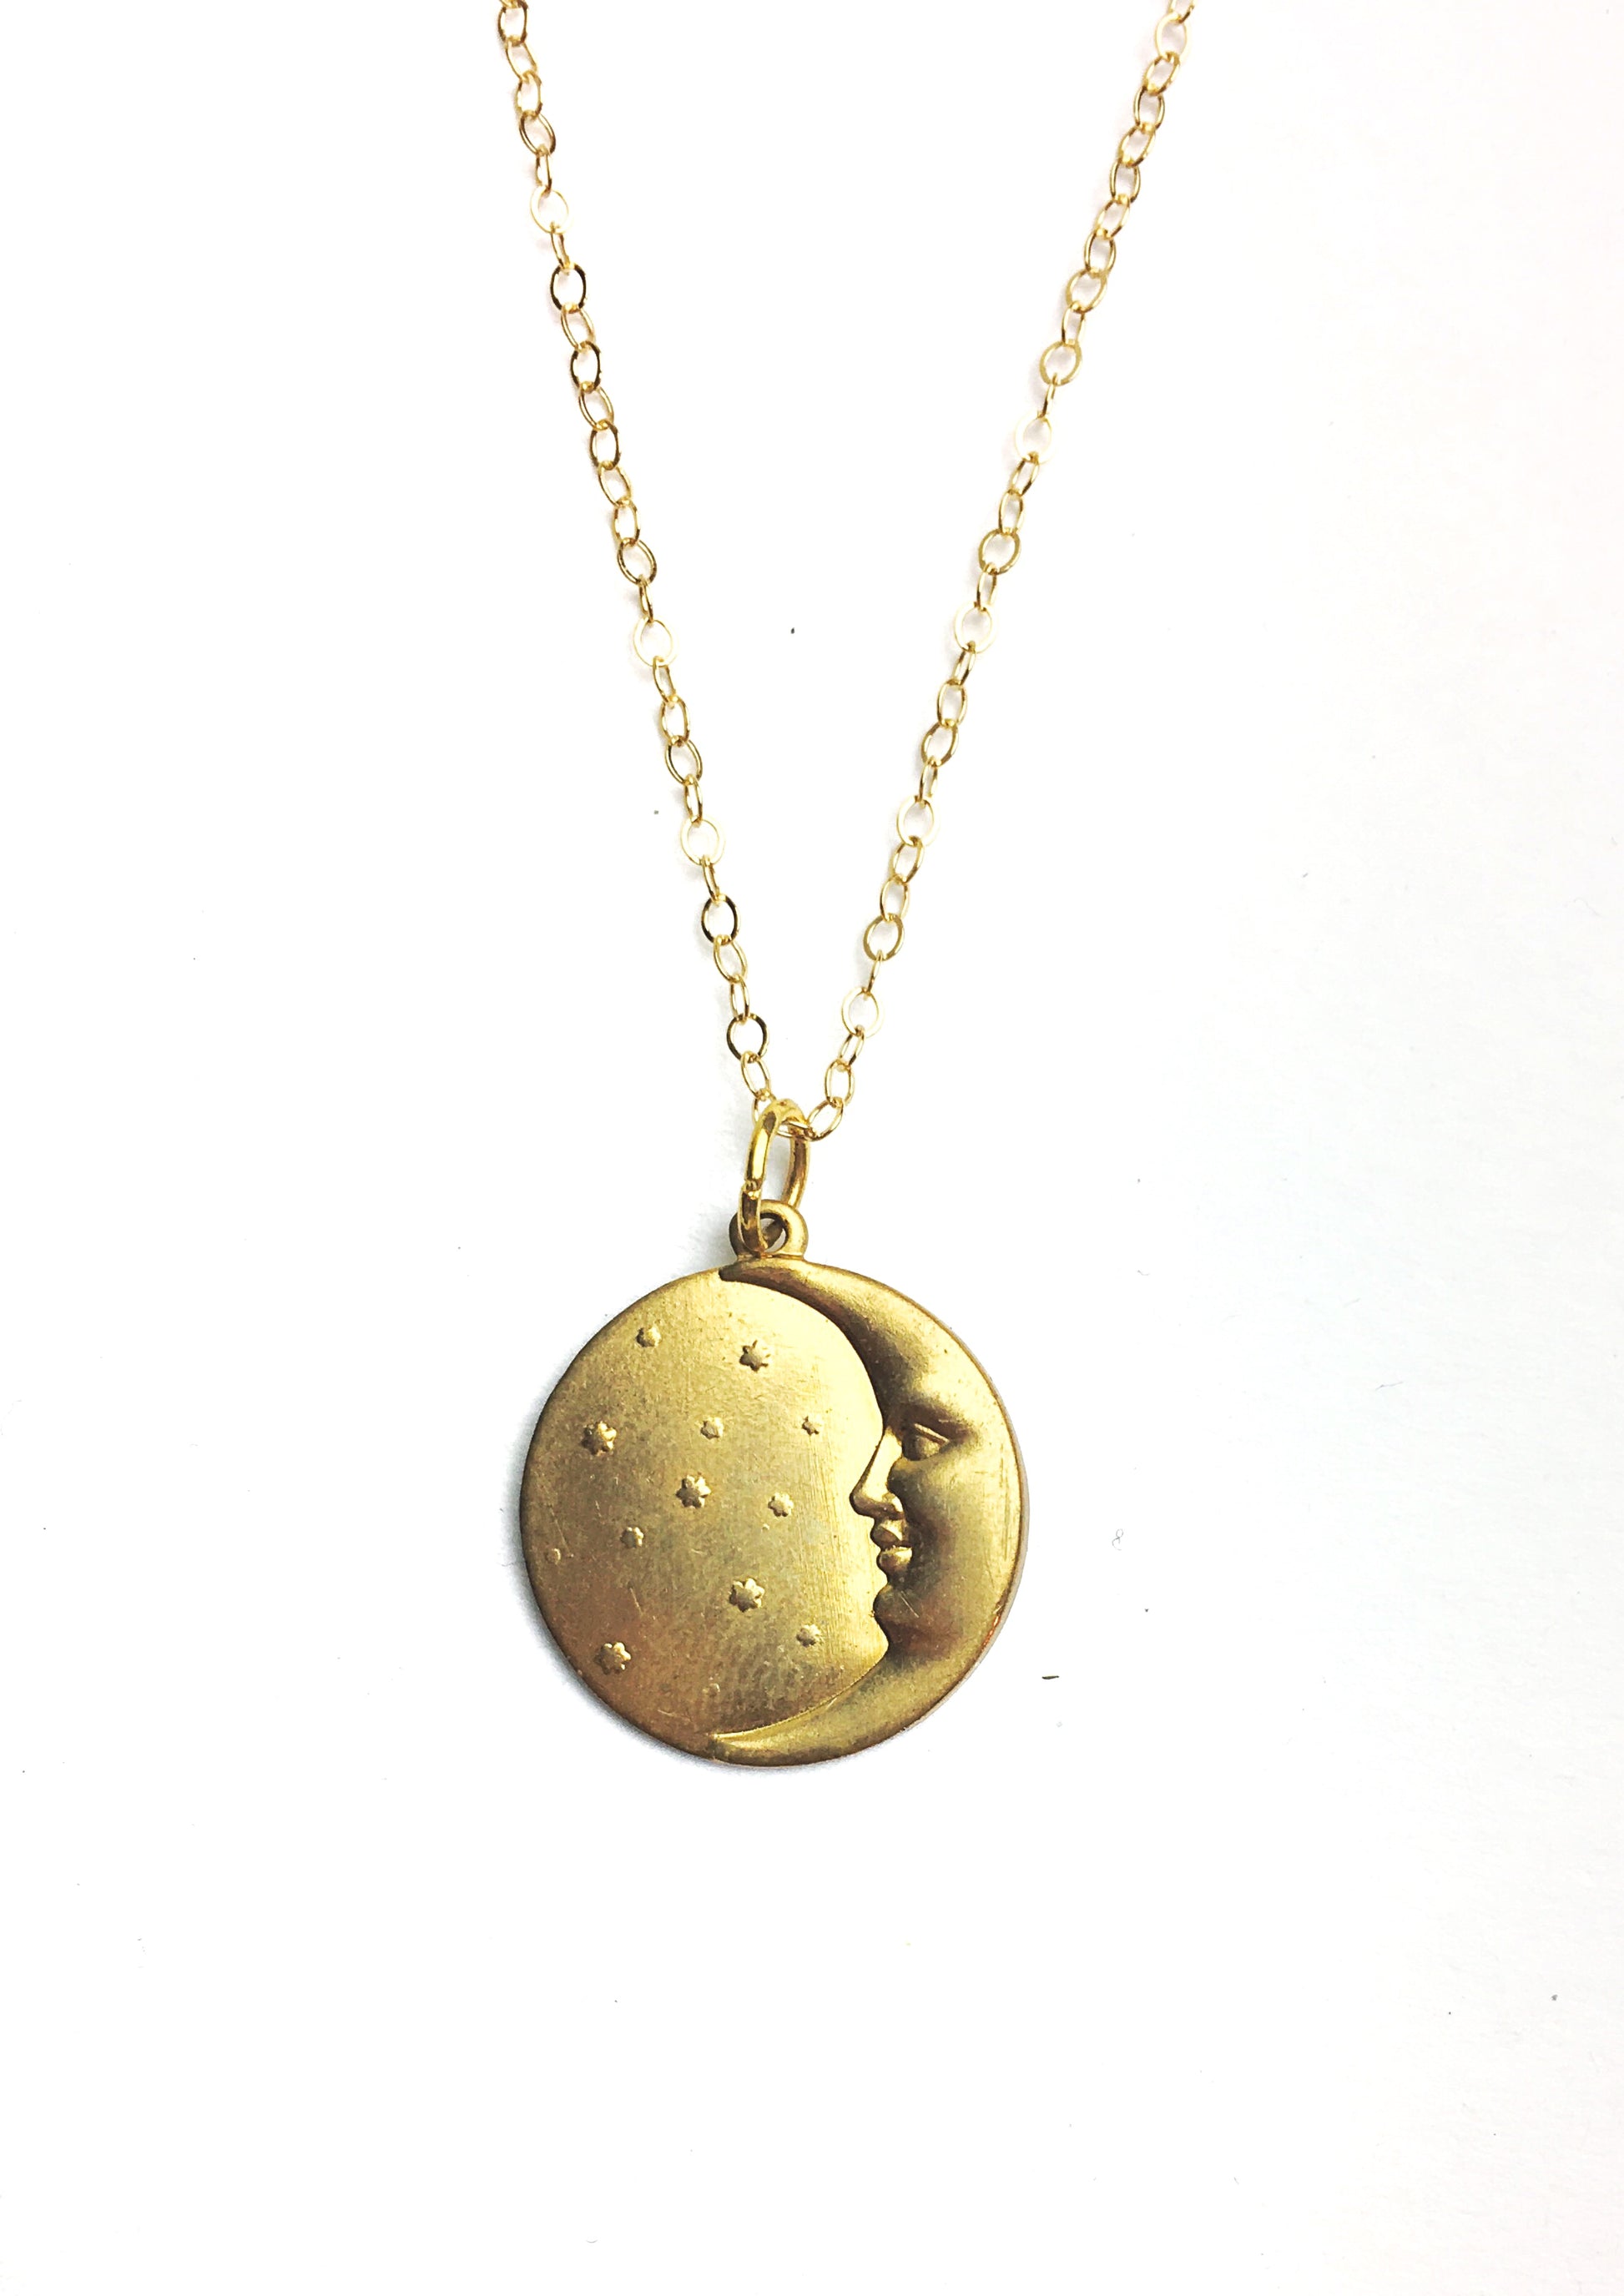 The Sun and Moon Charm Necklace - Luni